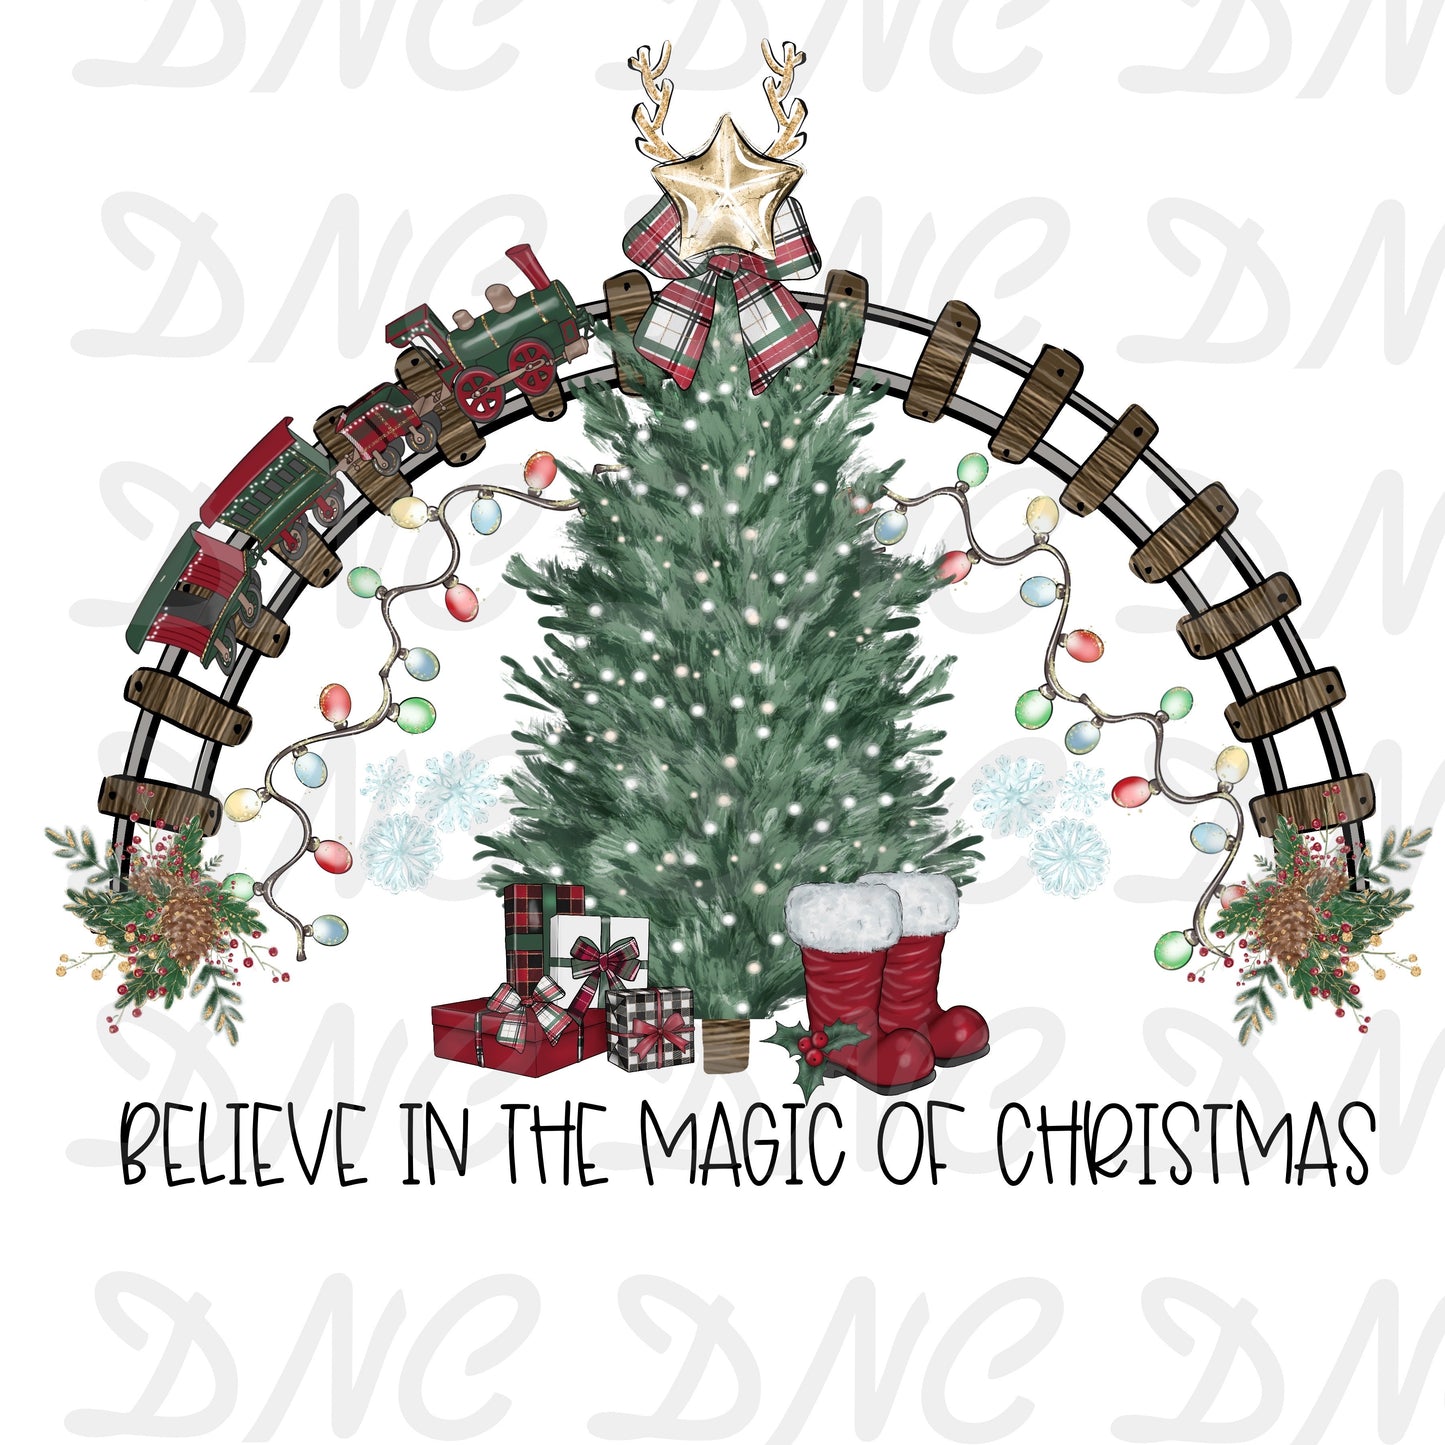 Believe in the magic of christmas with tree- Sublimation